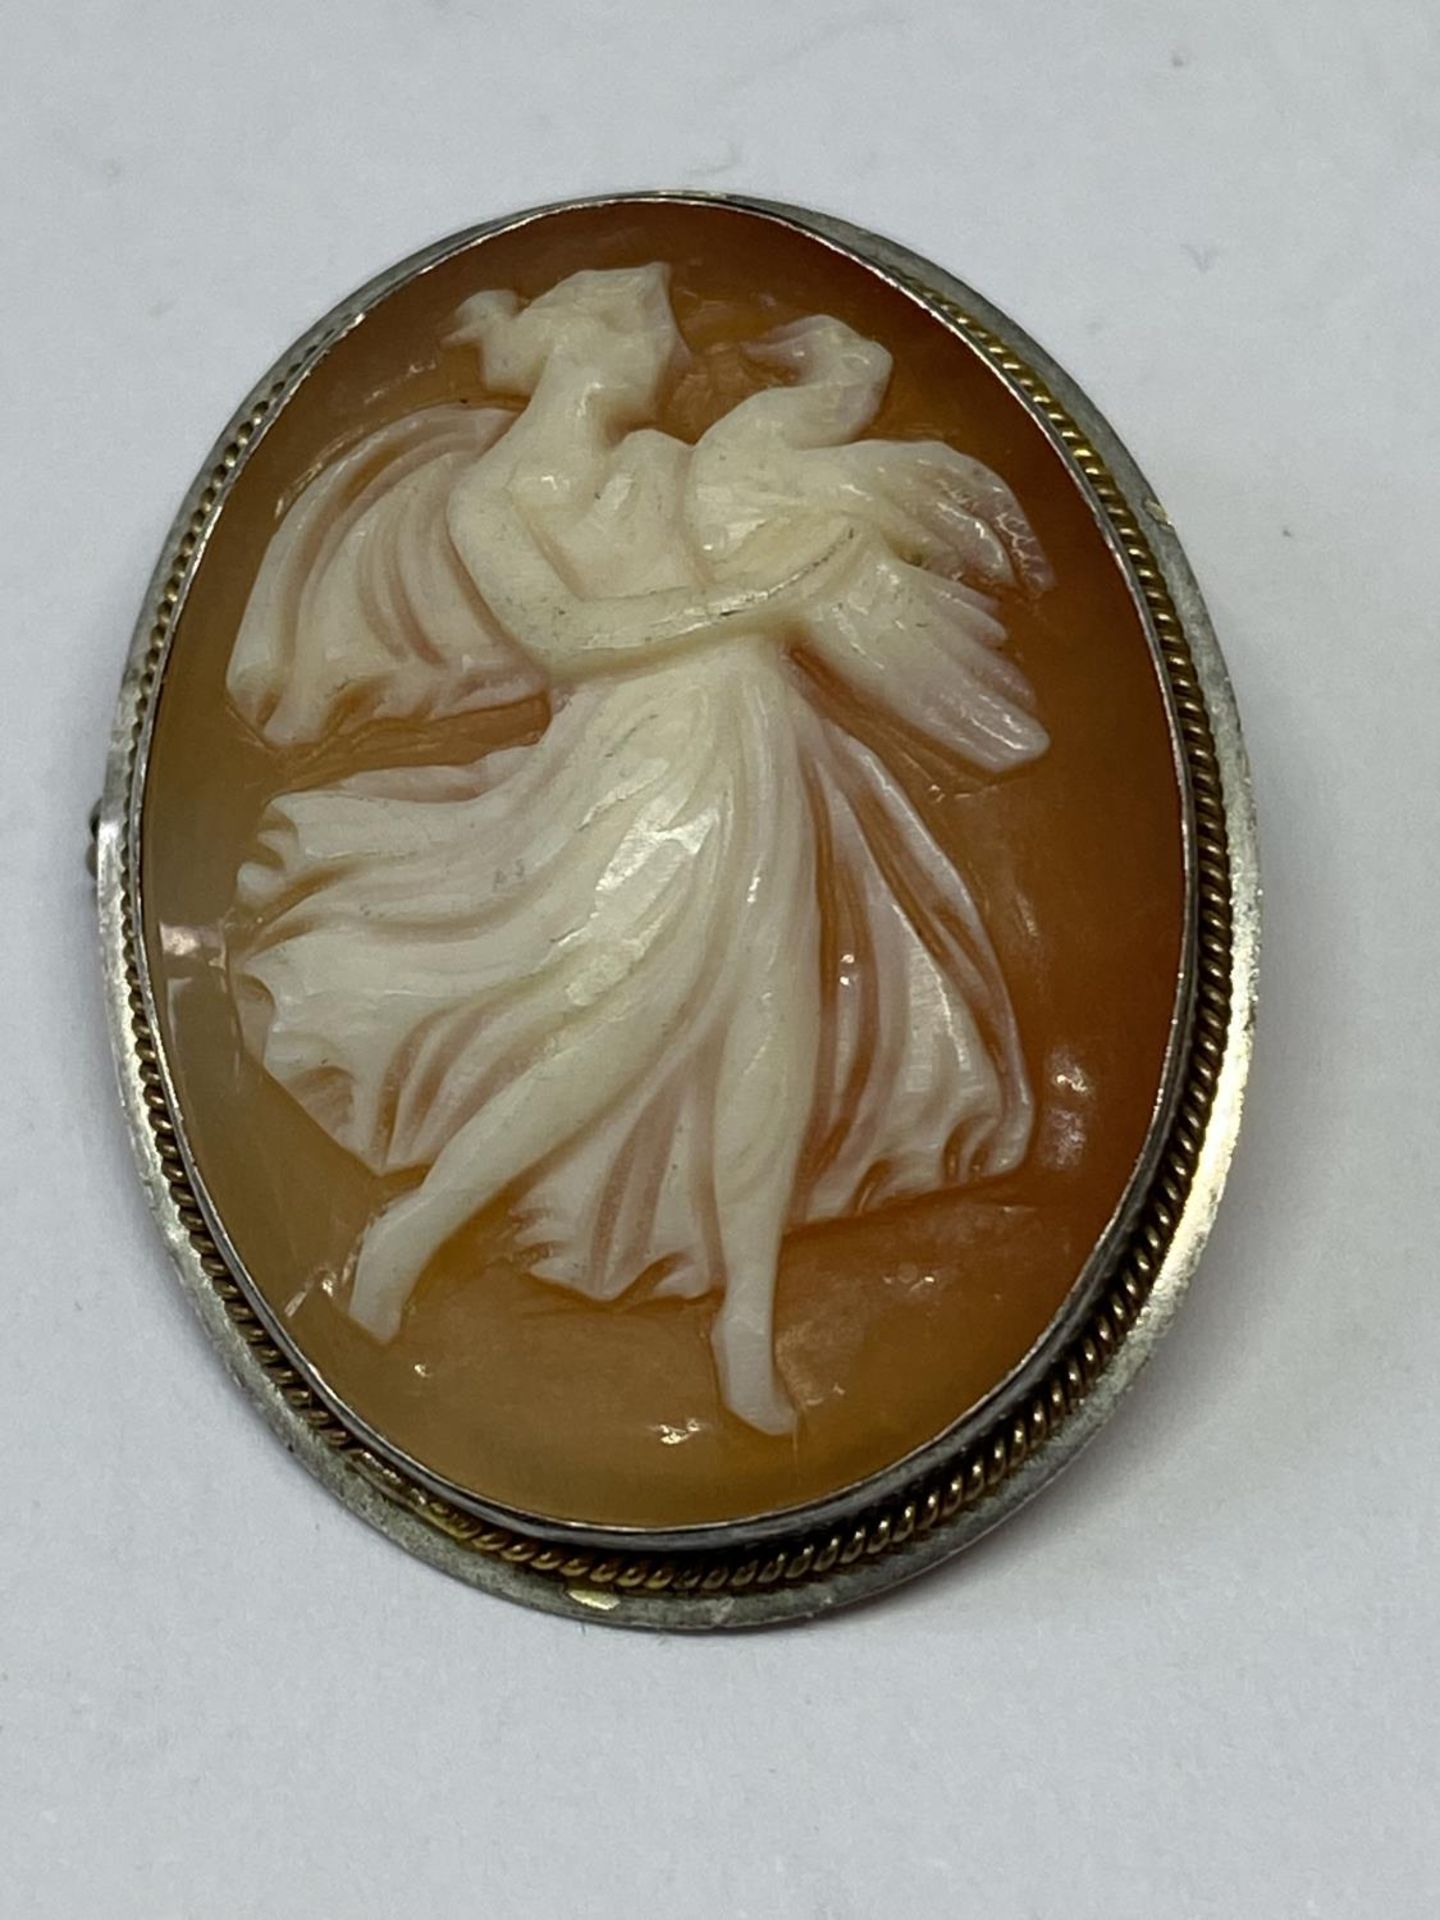 TWO MARKD SILVER DANCING LADY BROOCHES - Image 3 of 3